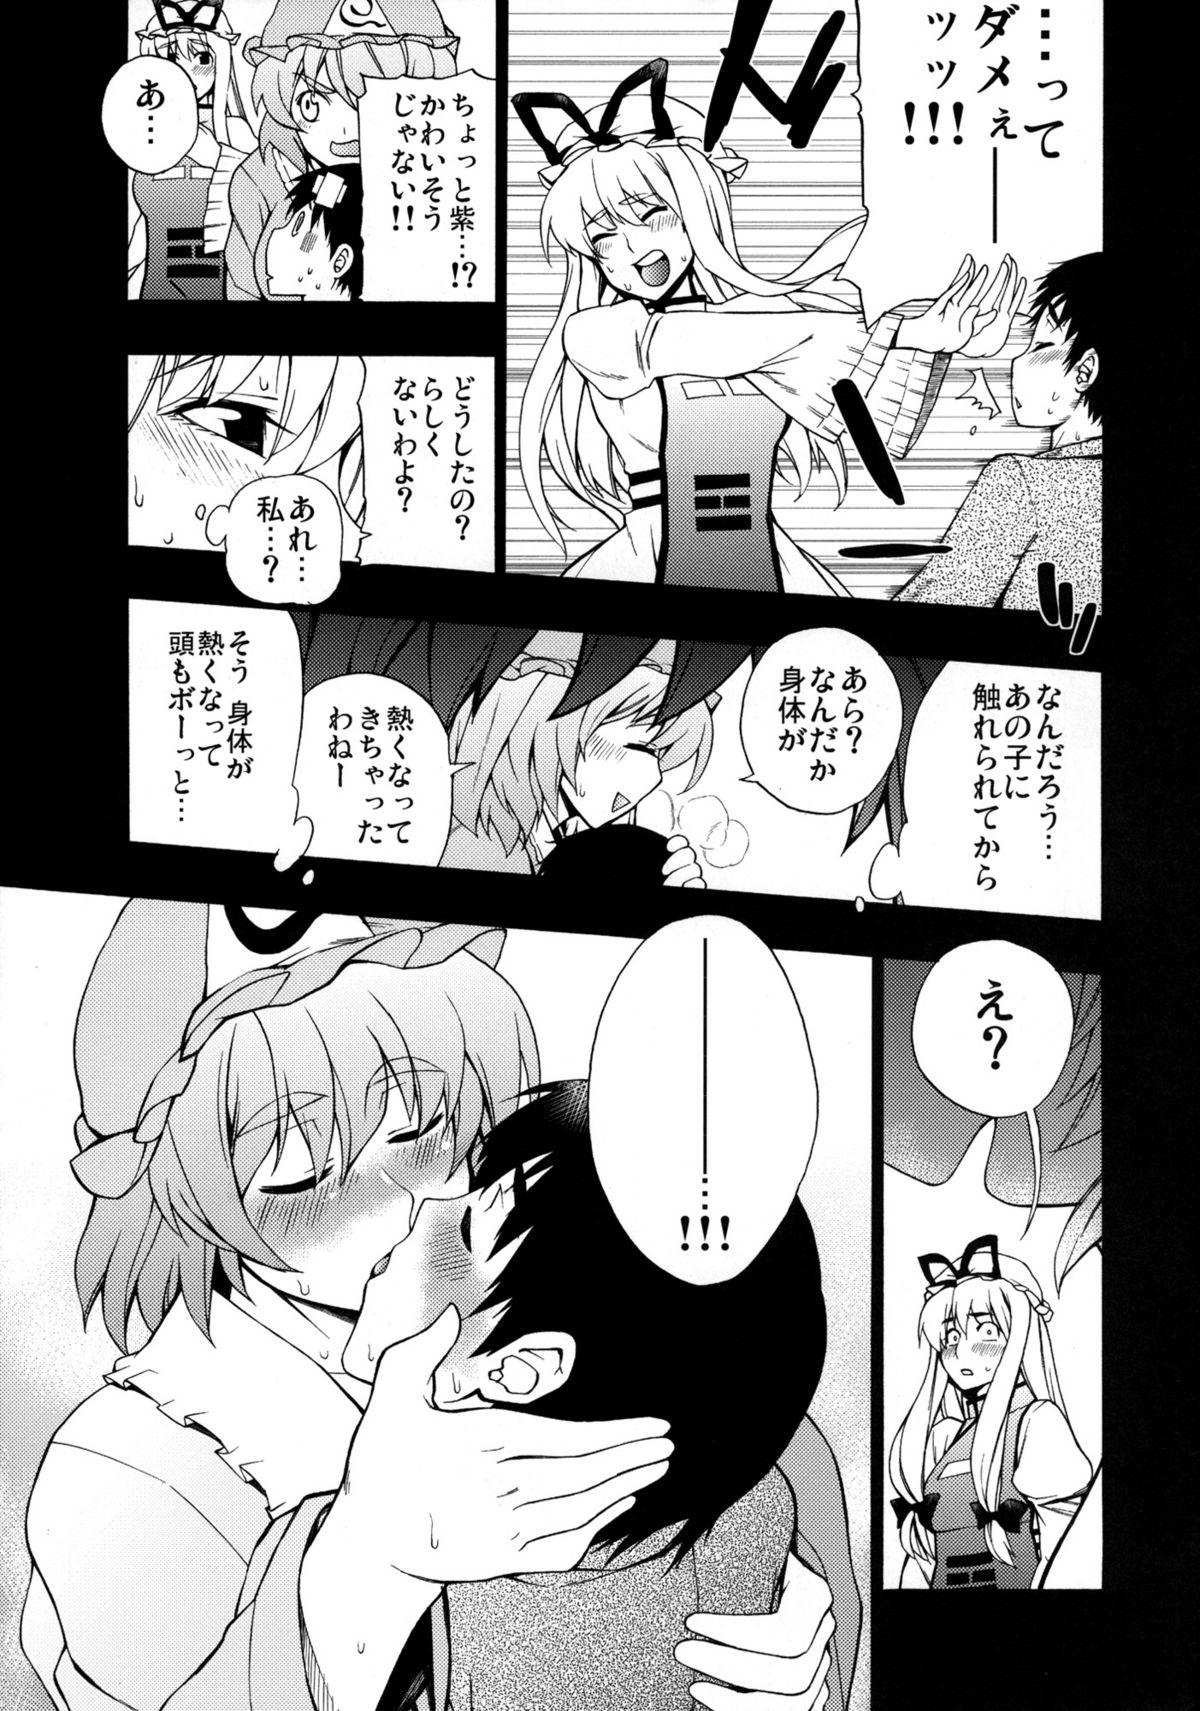 Dykes Love Connection - Touhou project Latex - Page 8